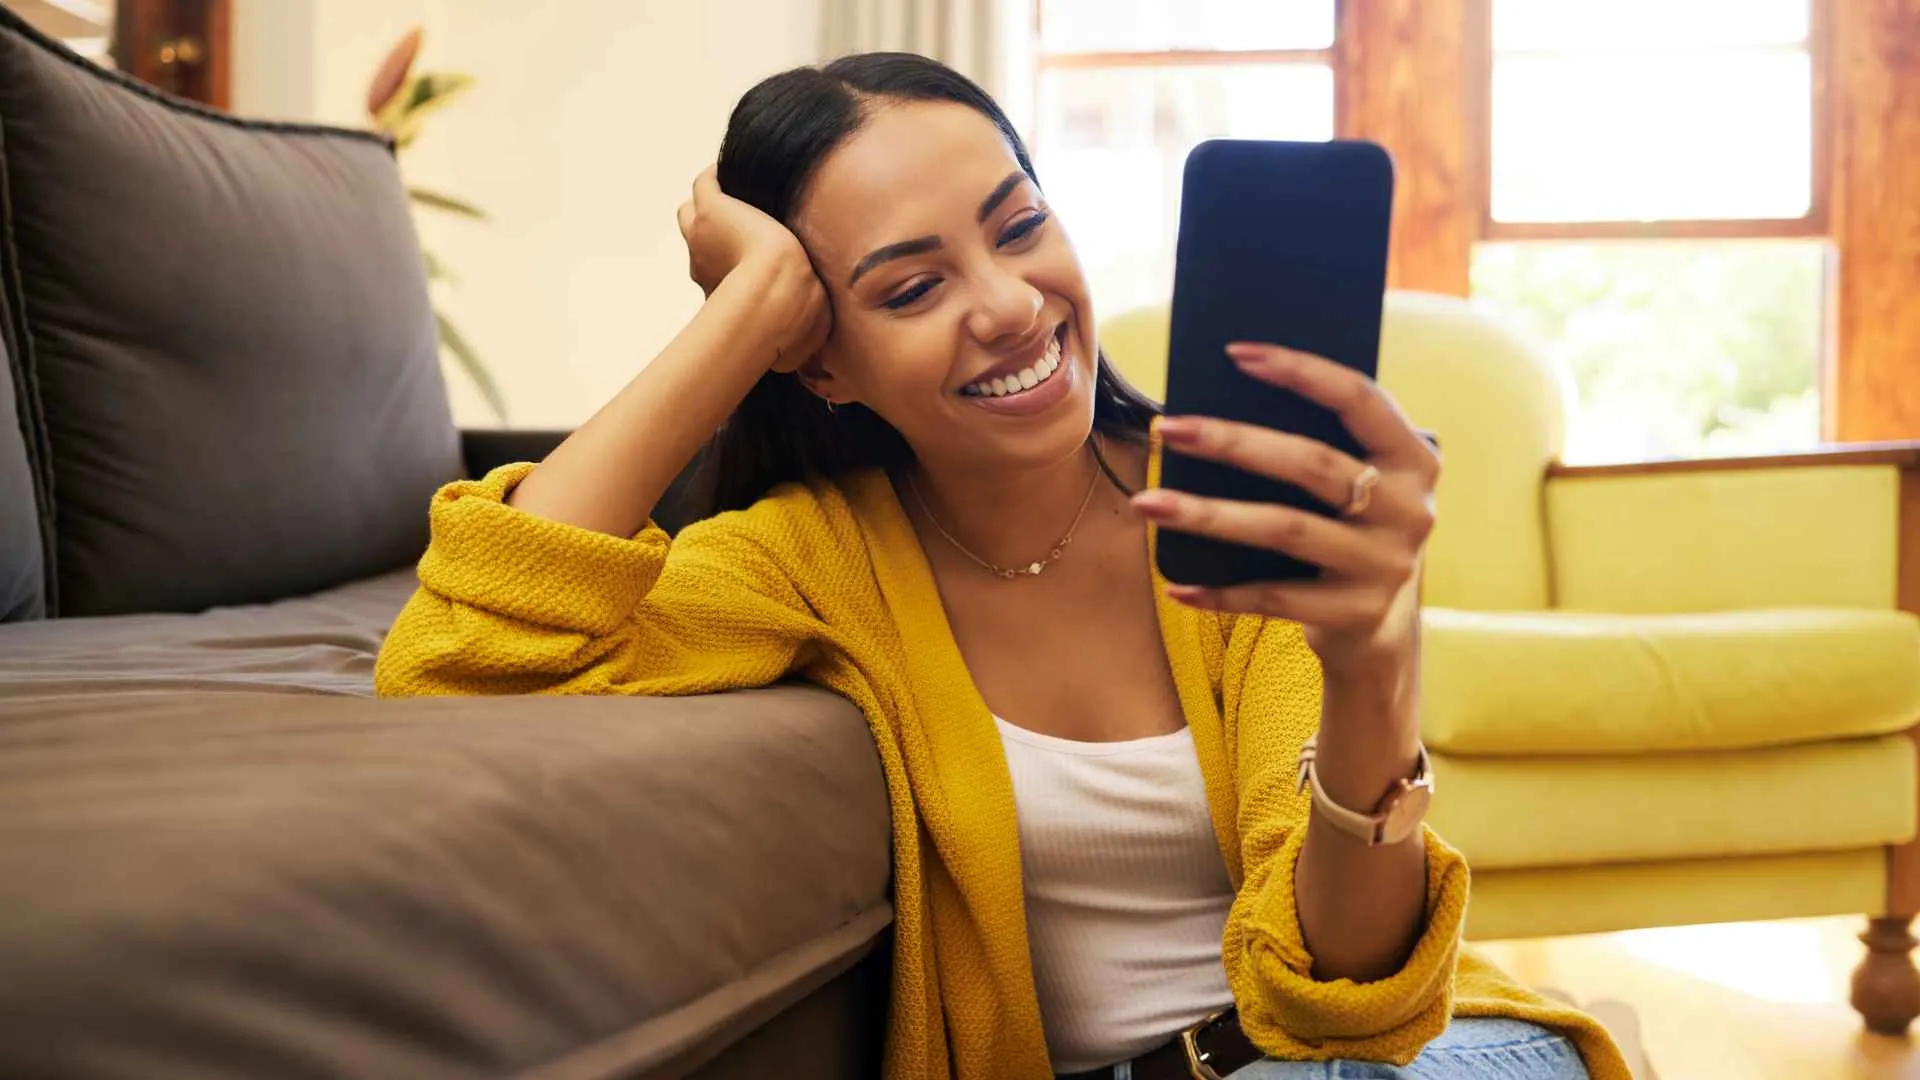 Woman smiling at her cellphone at home sitting on the floor against a sofa in a bright living room.